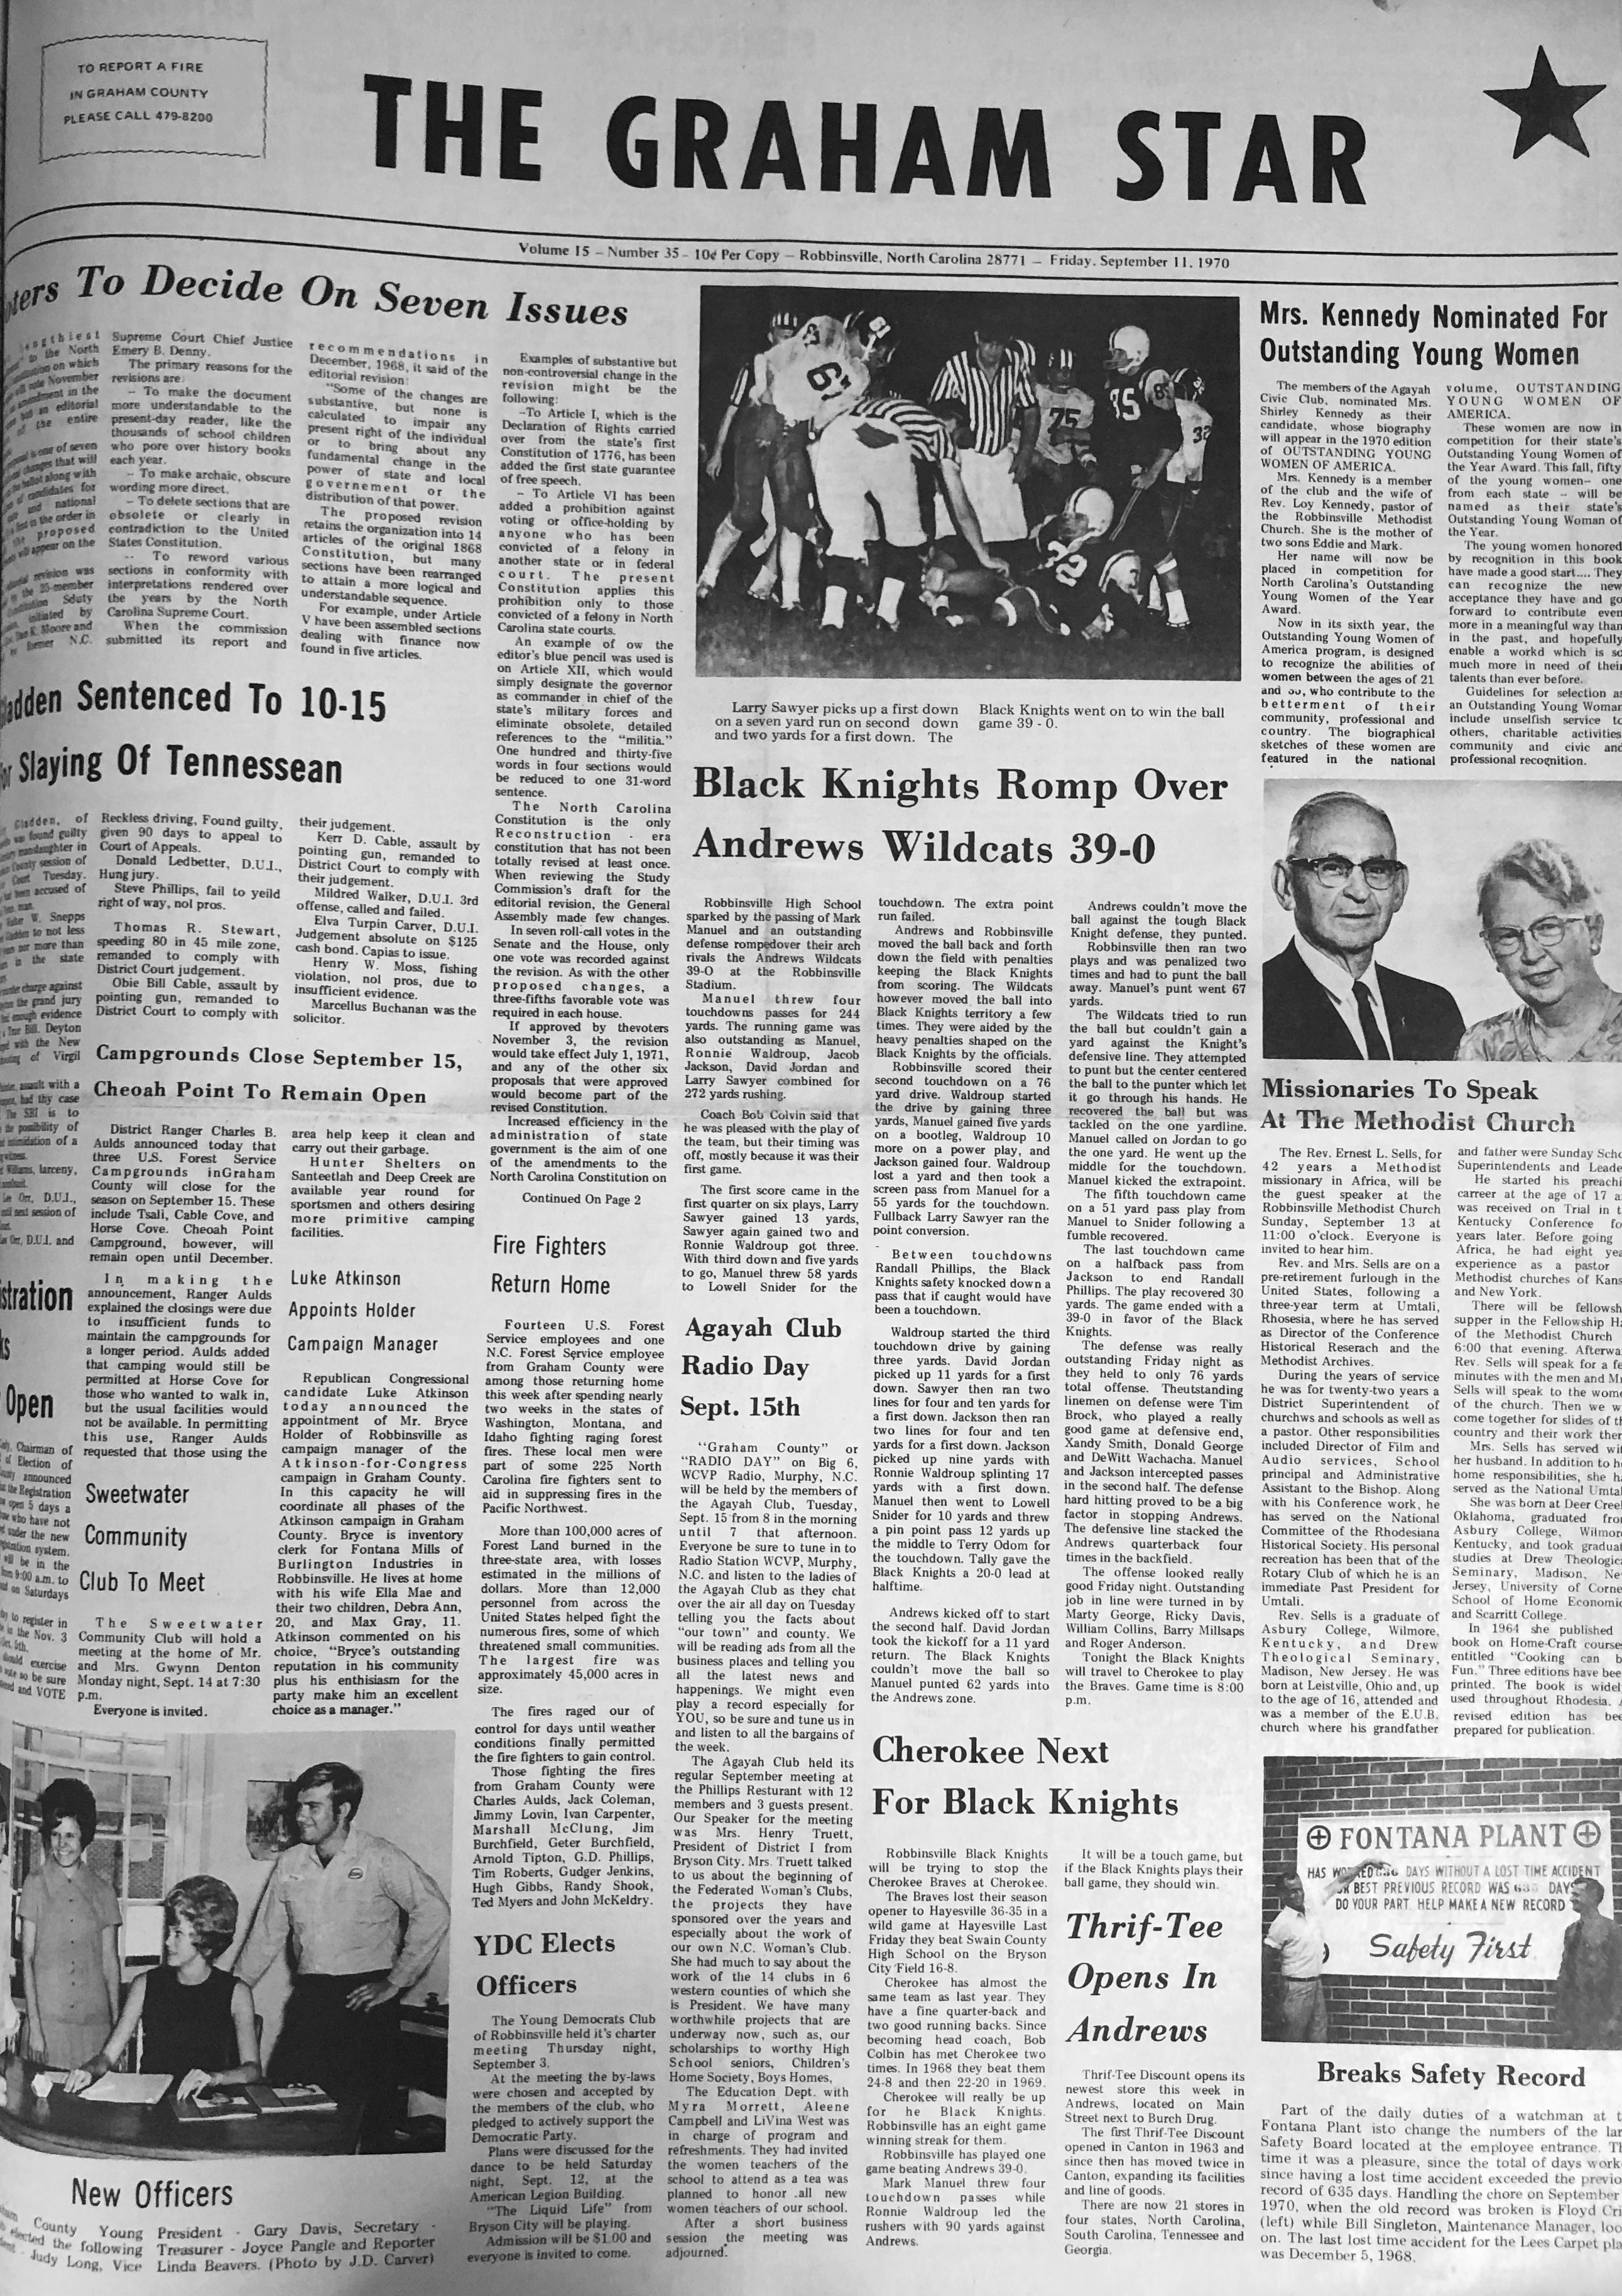 The Graham Star’s front cover from 50 years ago (Sept. 11, 1970).